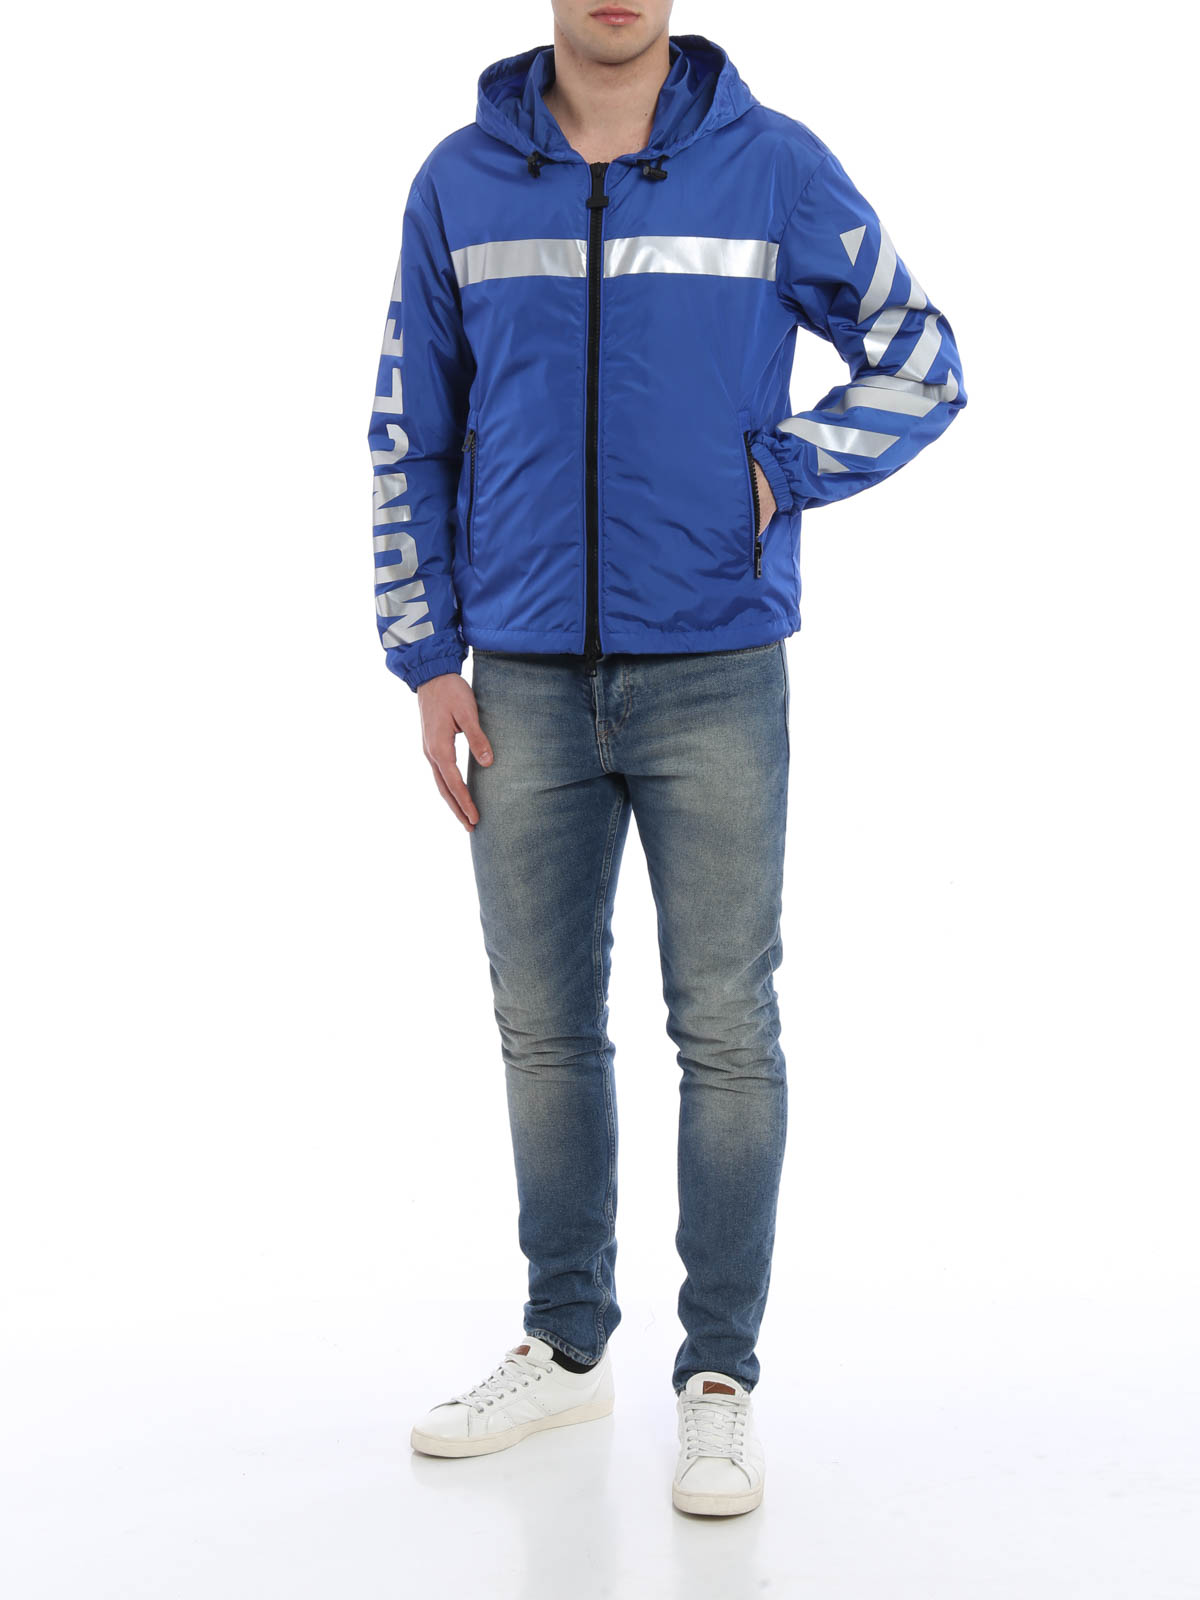 Incentive gorgeous shipbuilding Casual jackets Moncler - Gangui jacket by Off-White - 41100805415573B